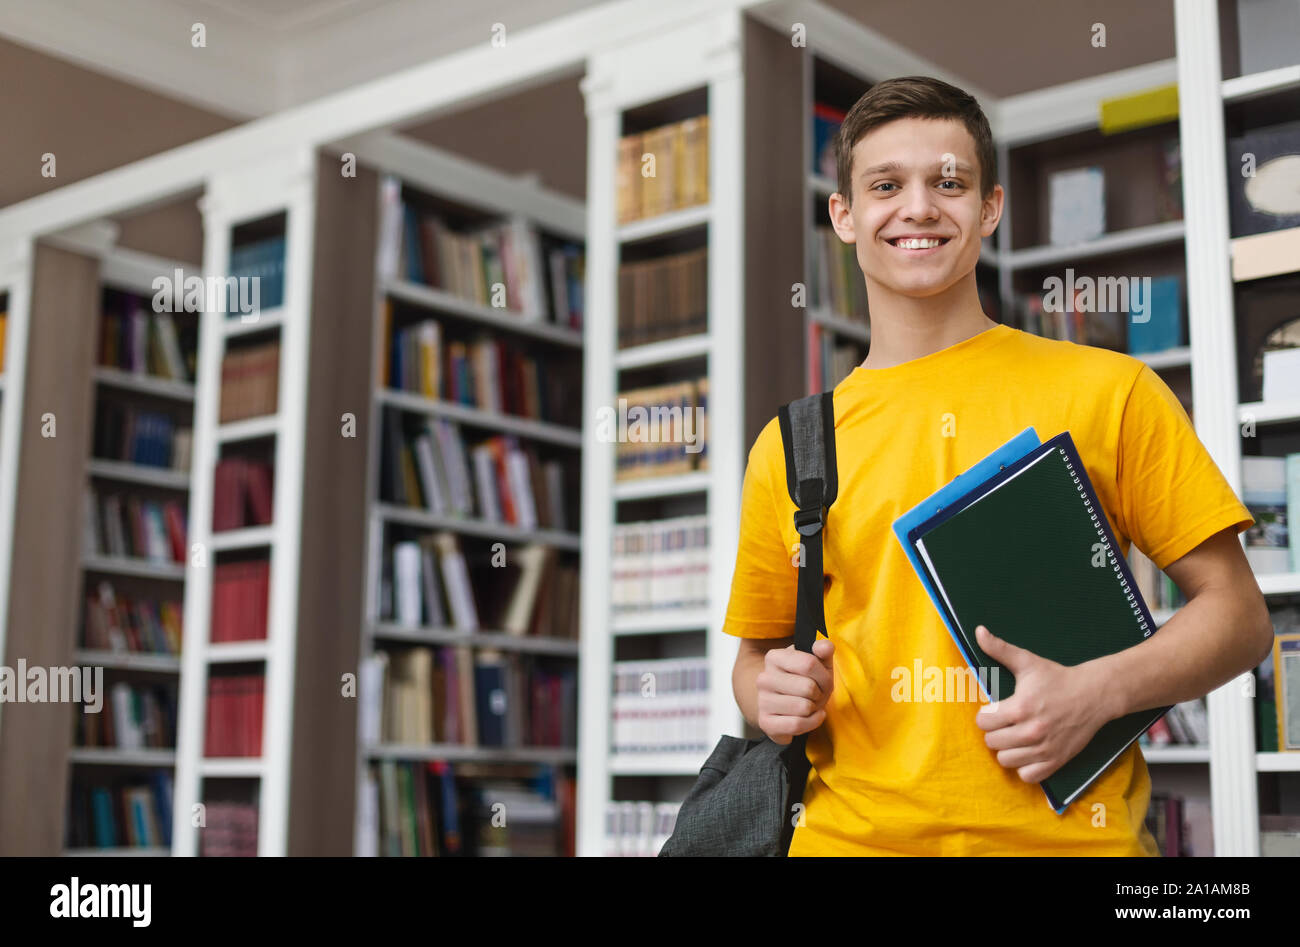 Smiling guy posing in library, holding books and notes Stock Photo